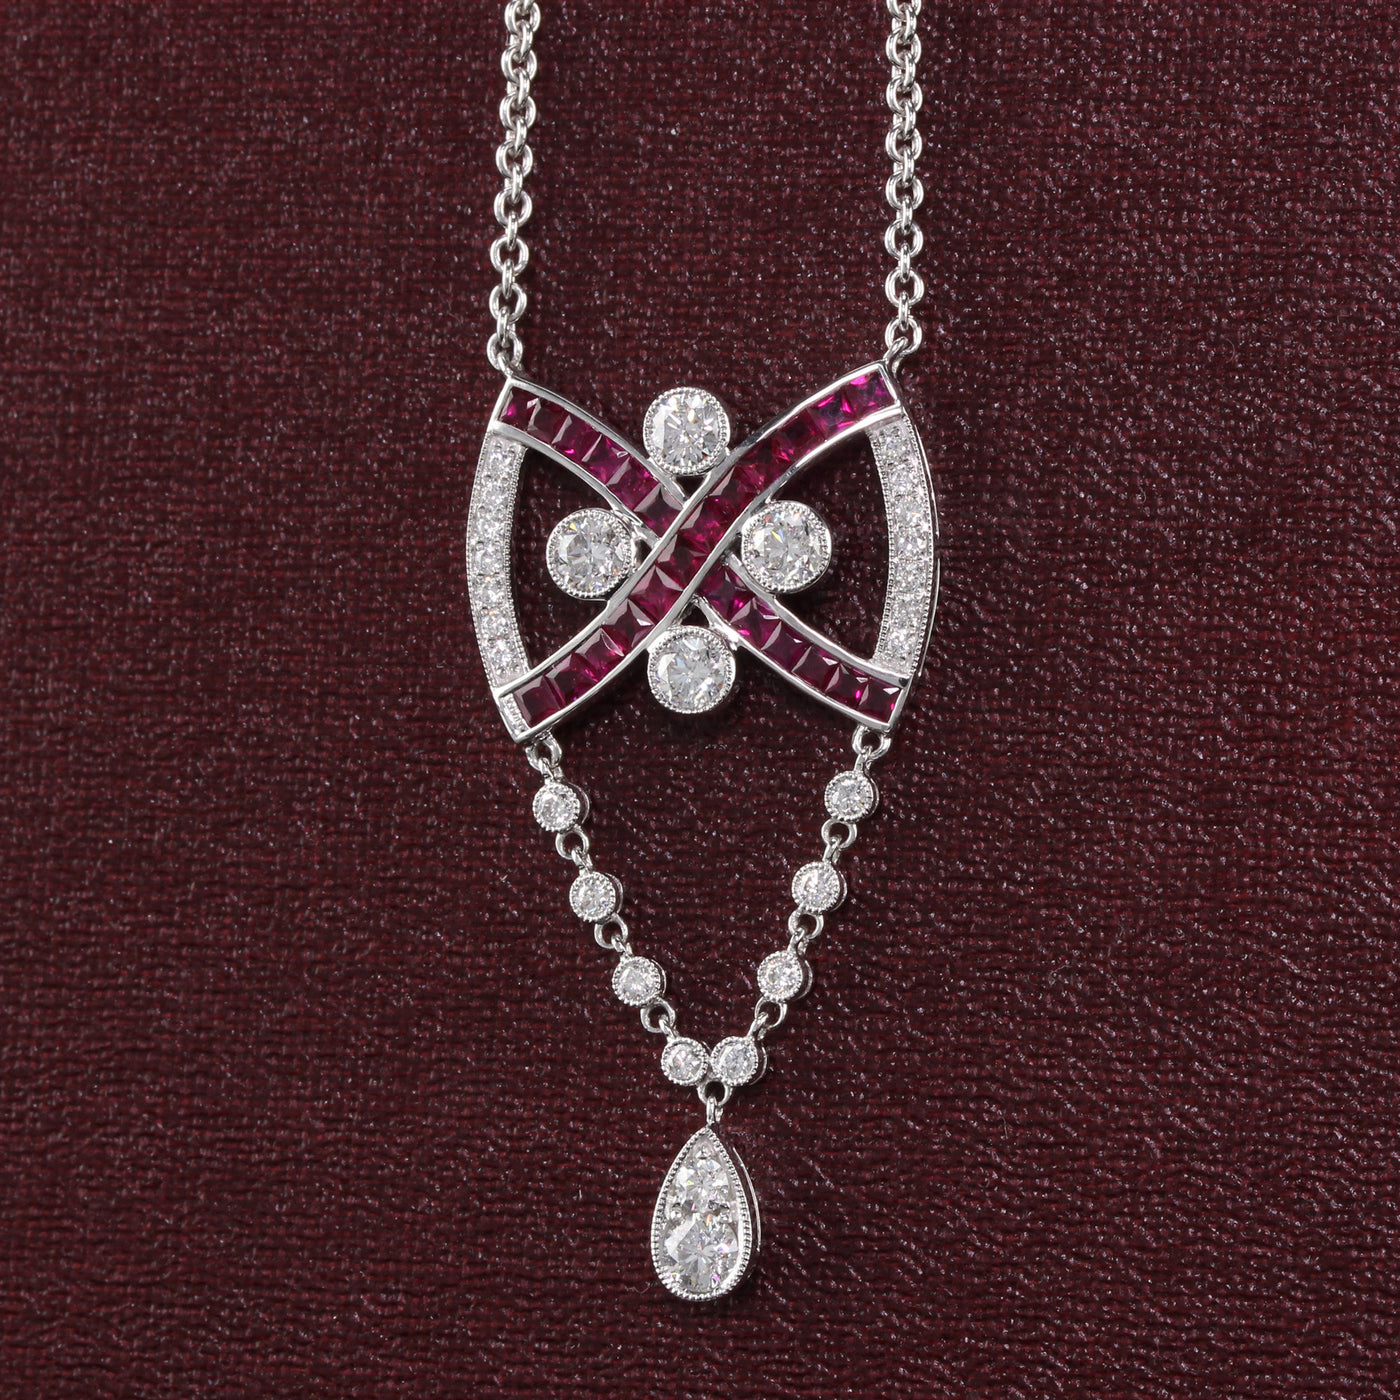 Vintage Estate 18K White Gold Diamond and Ruby Necklace